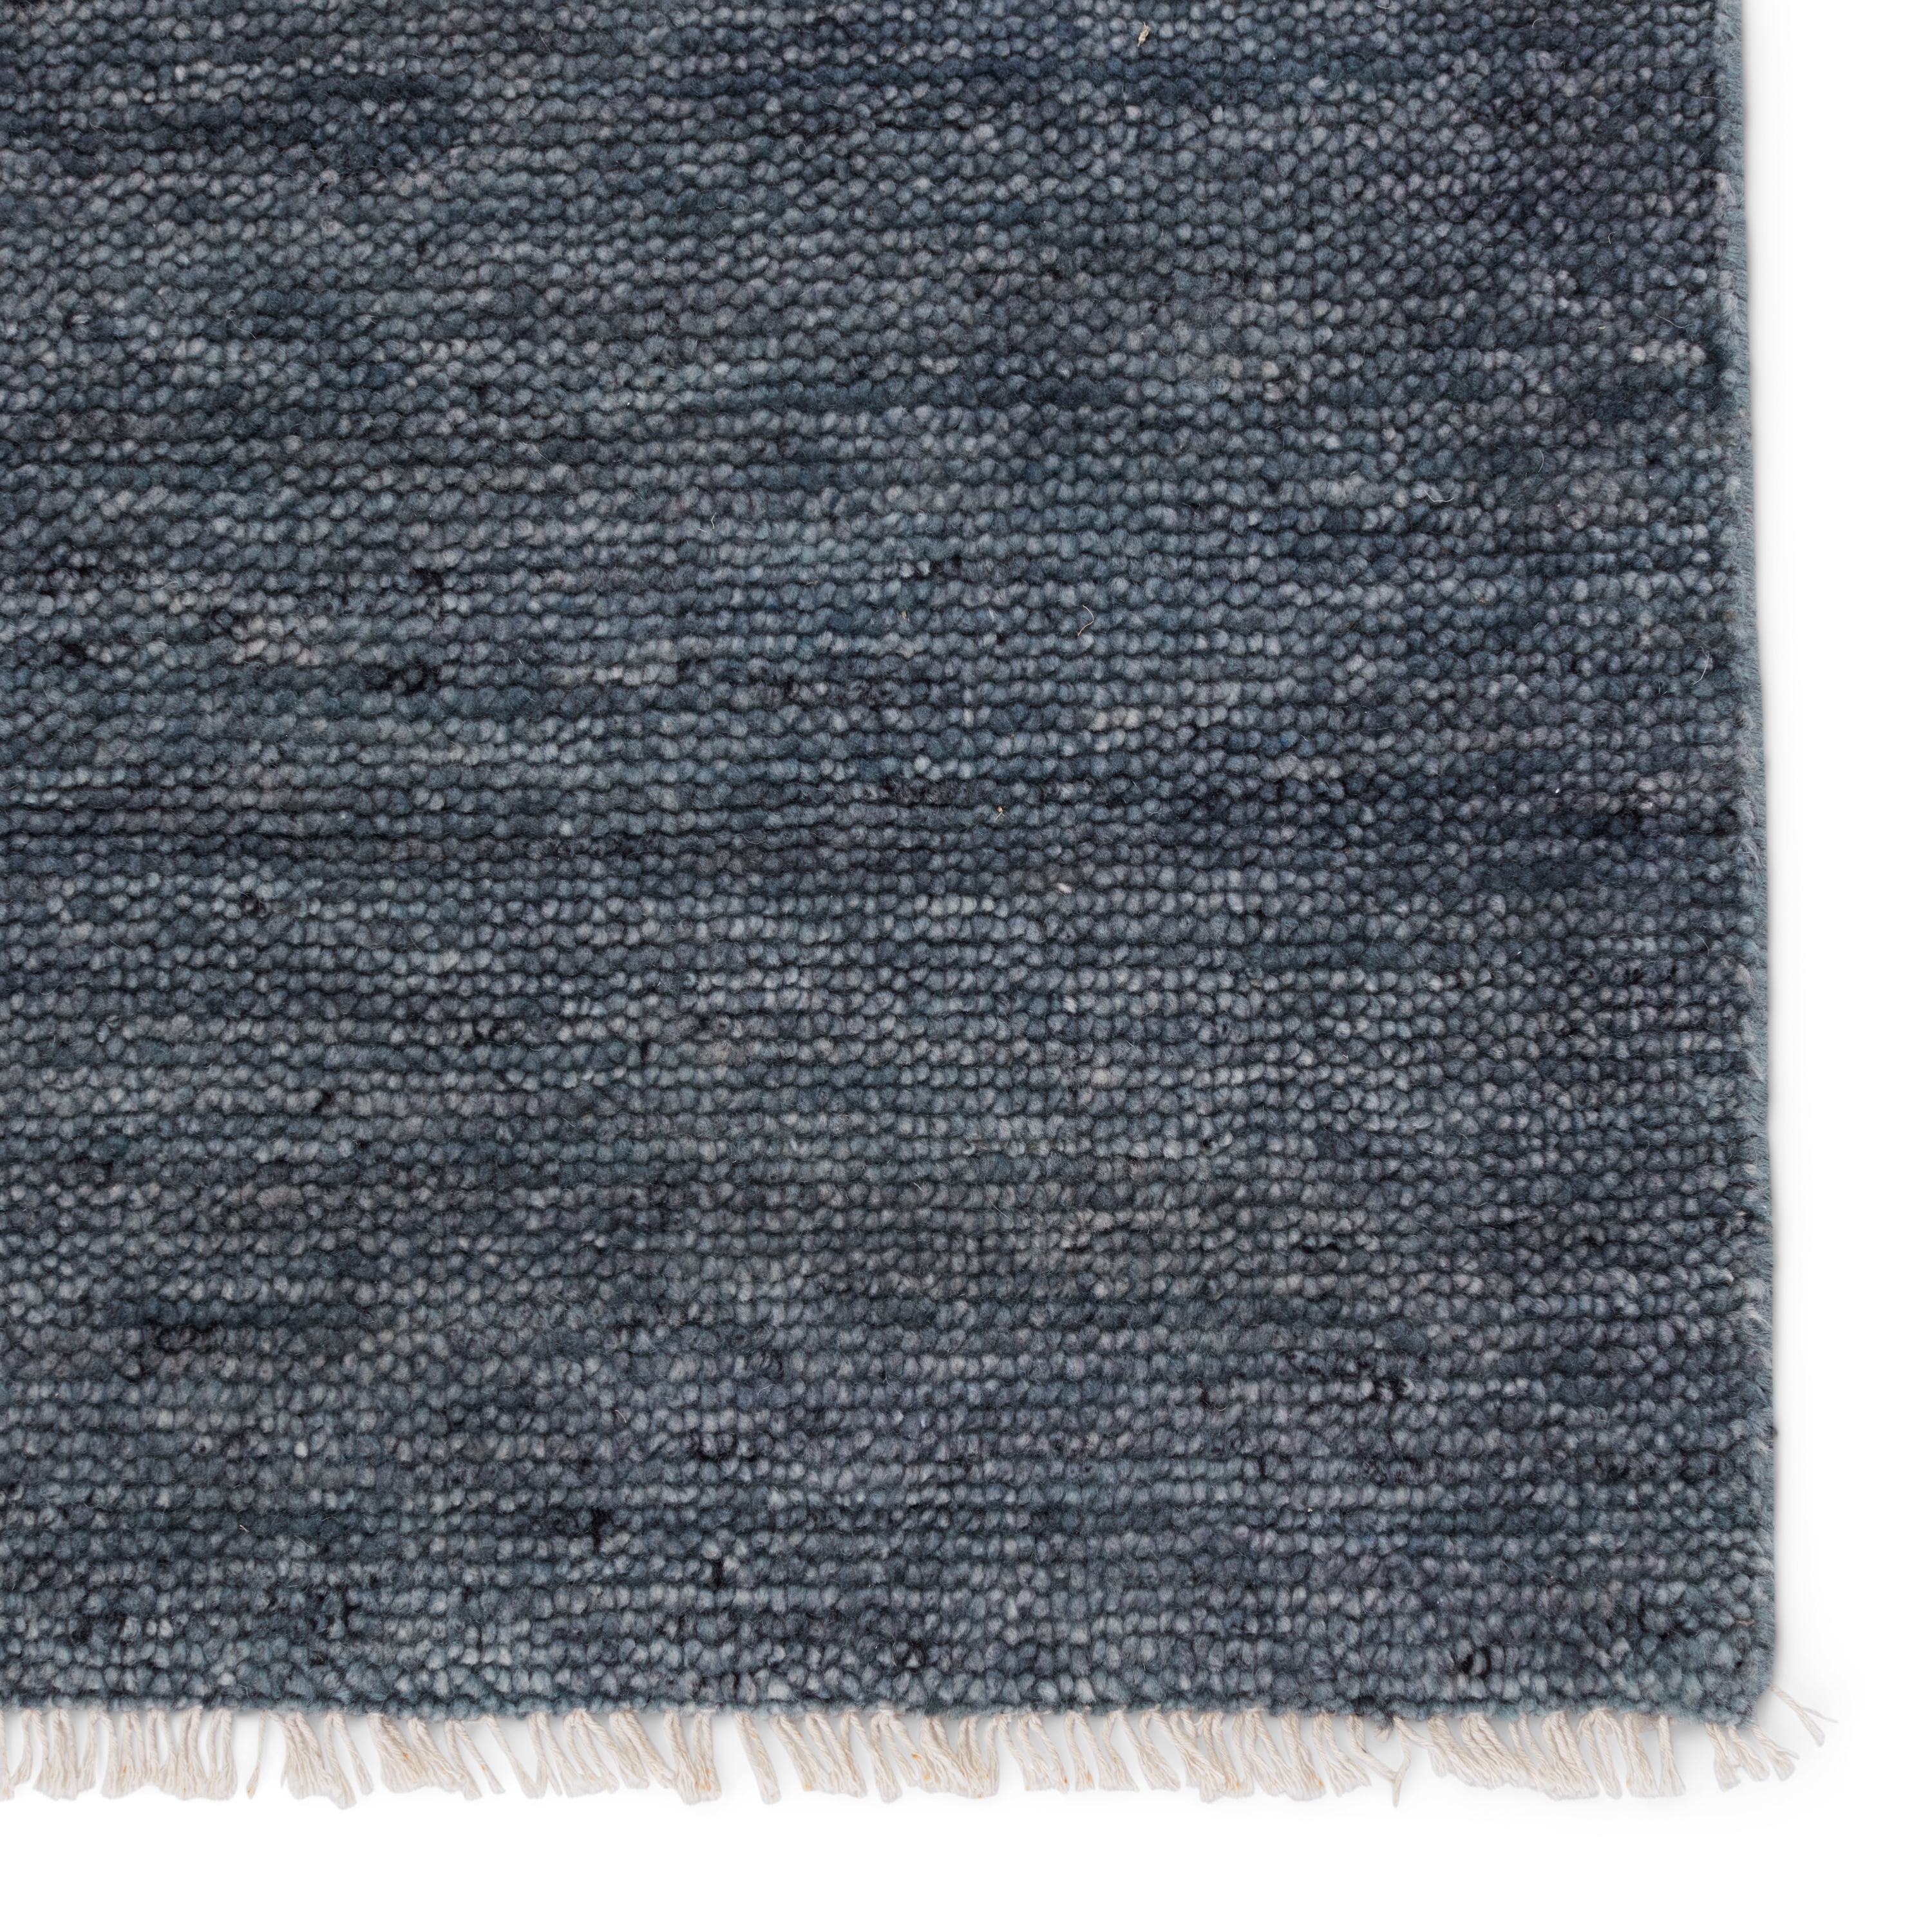 Origin Hand-Knotted Solid Dark Blue Area Rug (6'X9') - Image 3